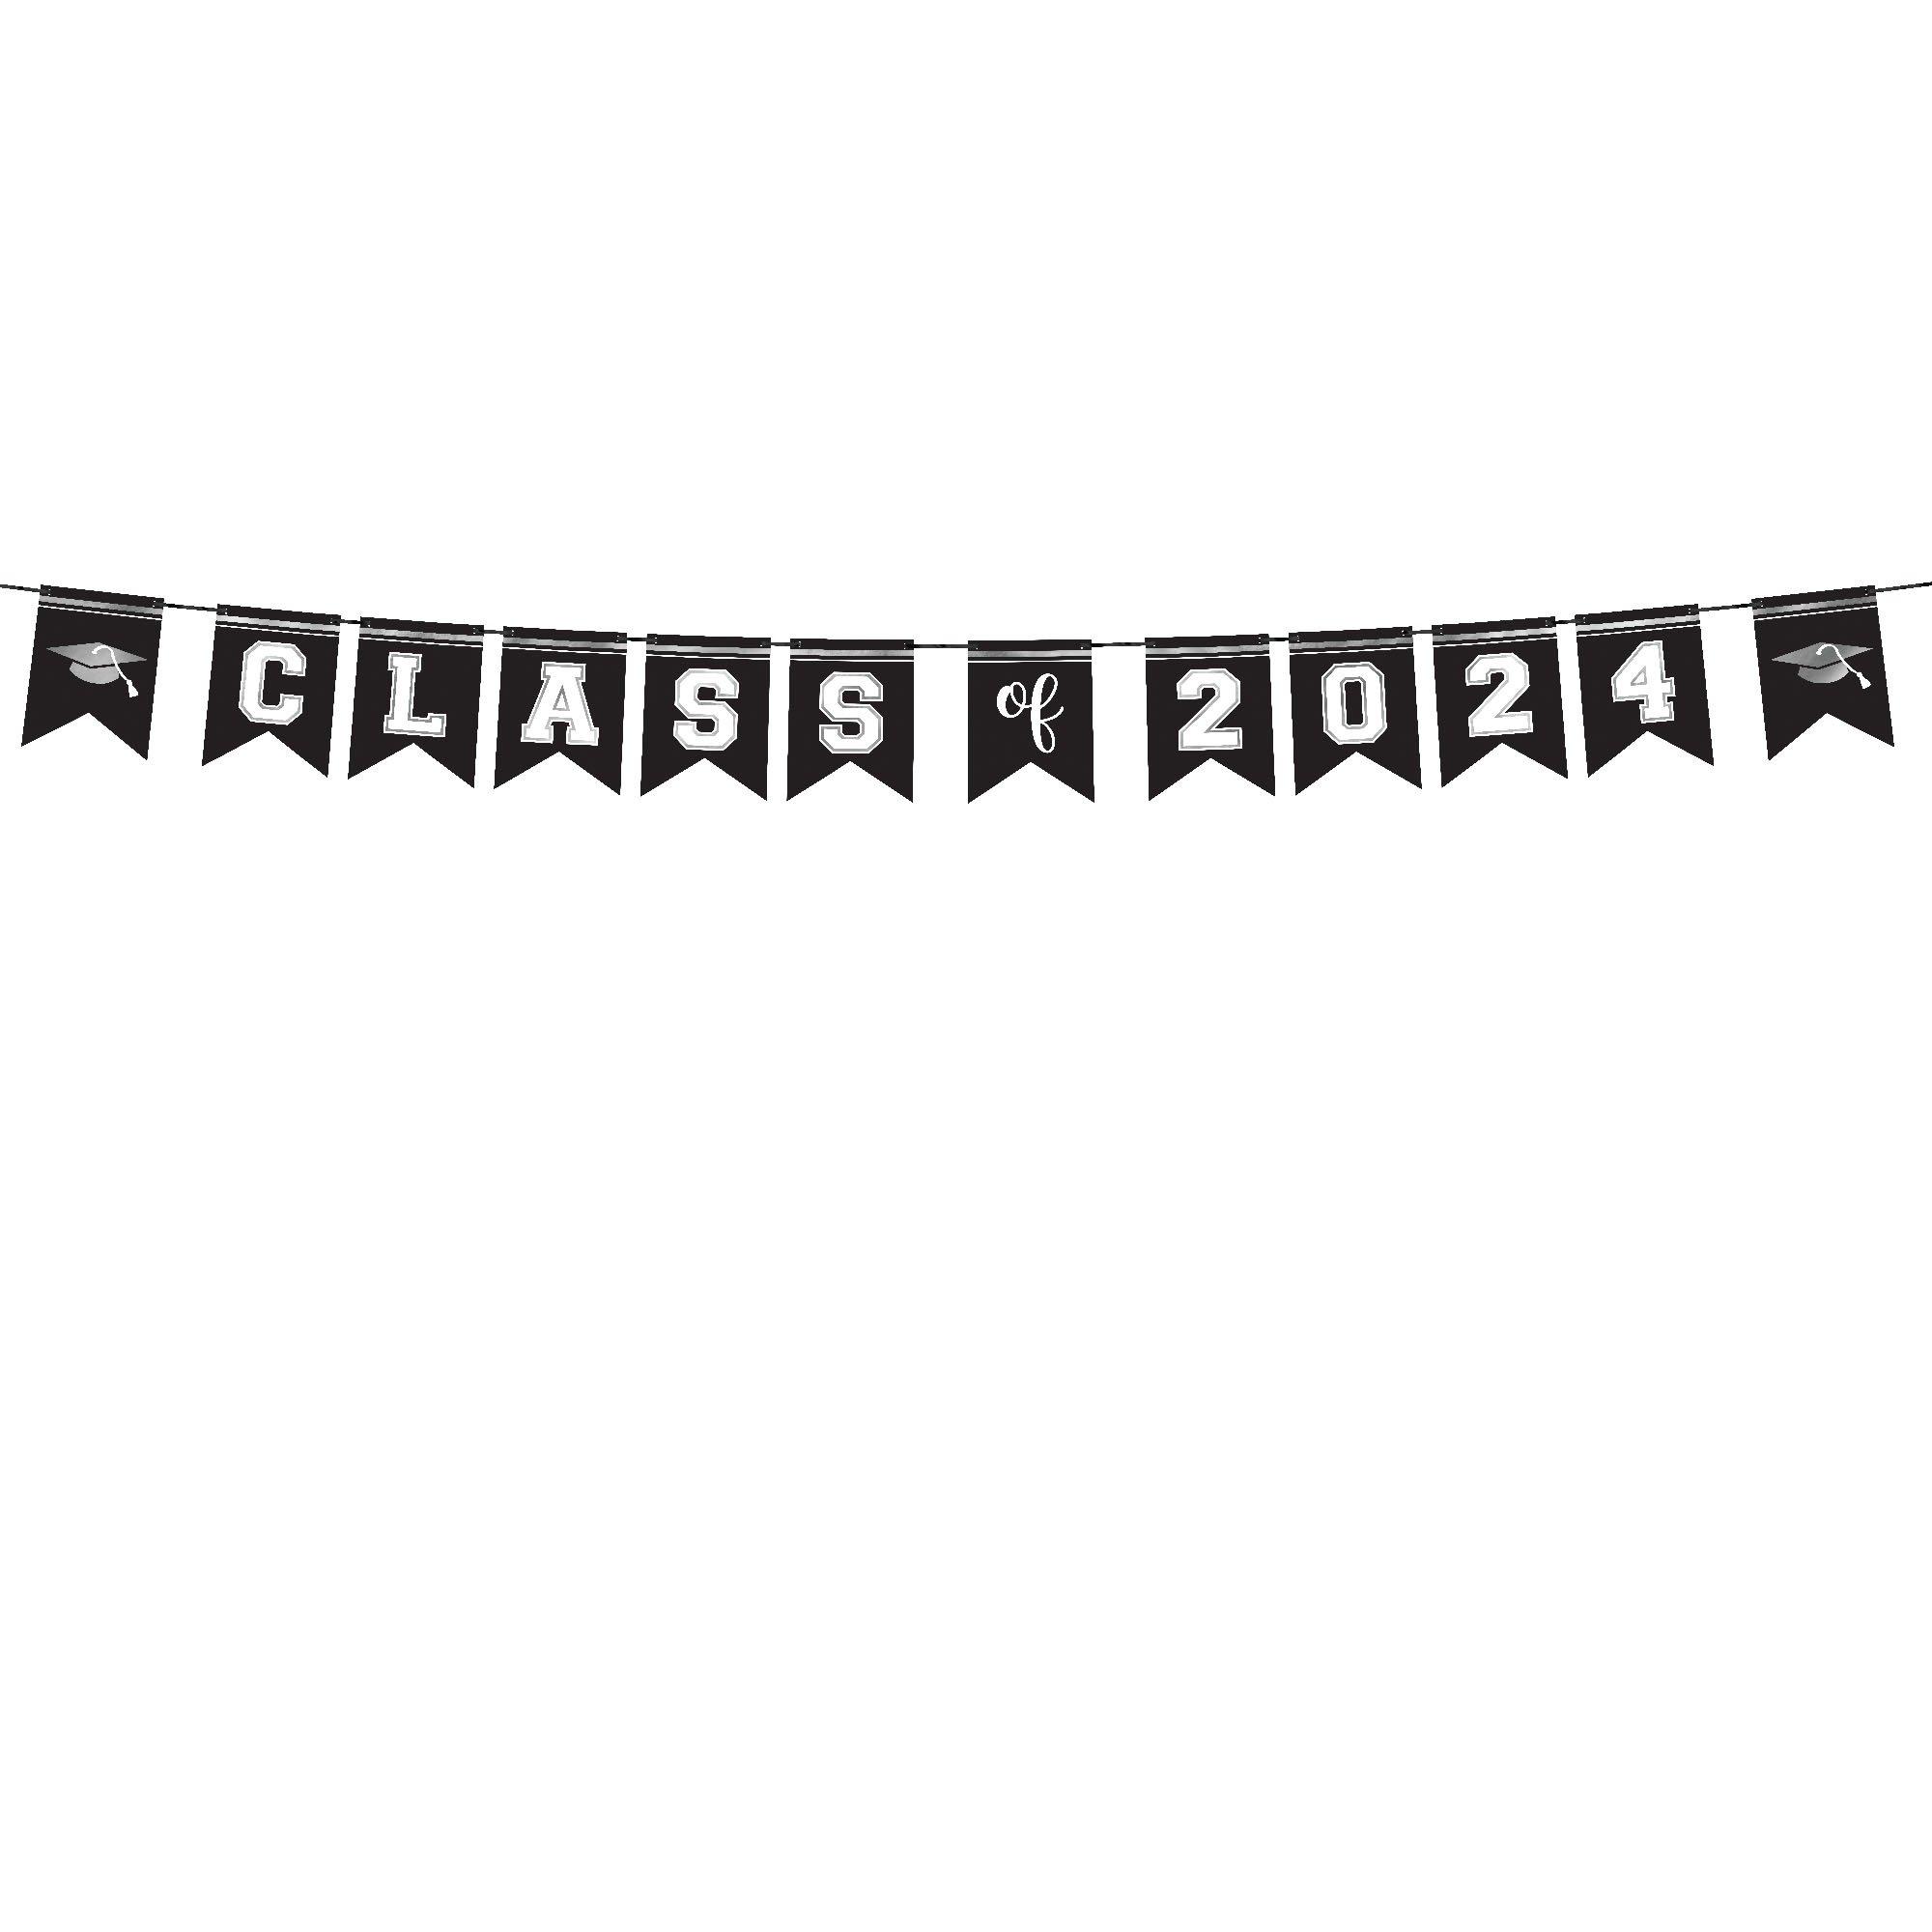 White Class of 2024 Graduation Cardstock Pennant Banner, 12ft